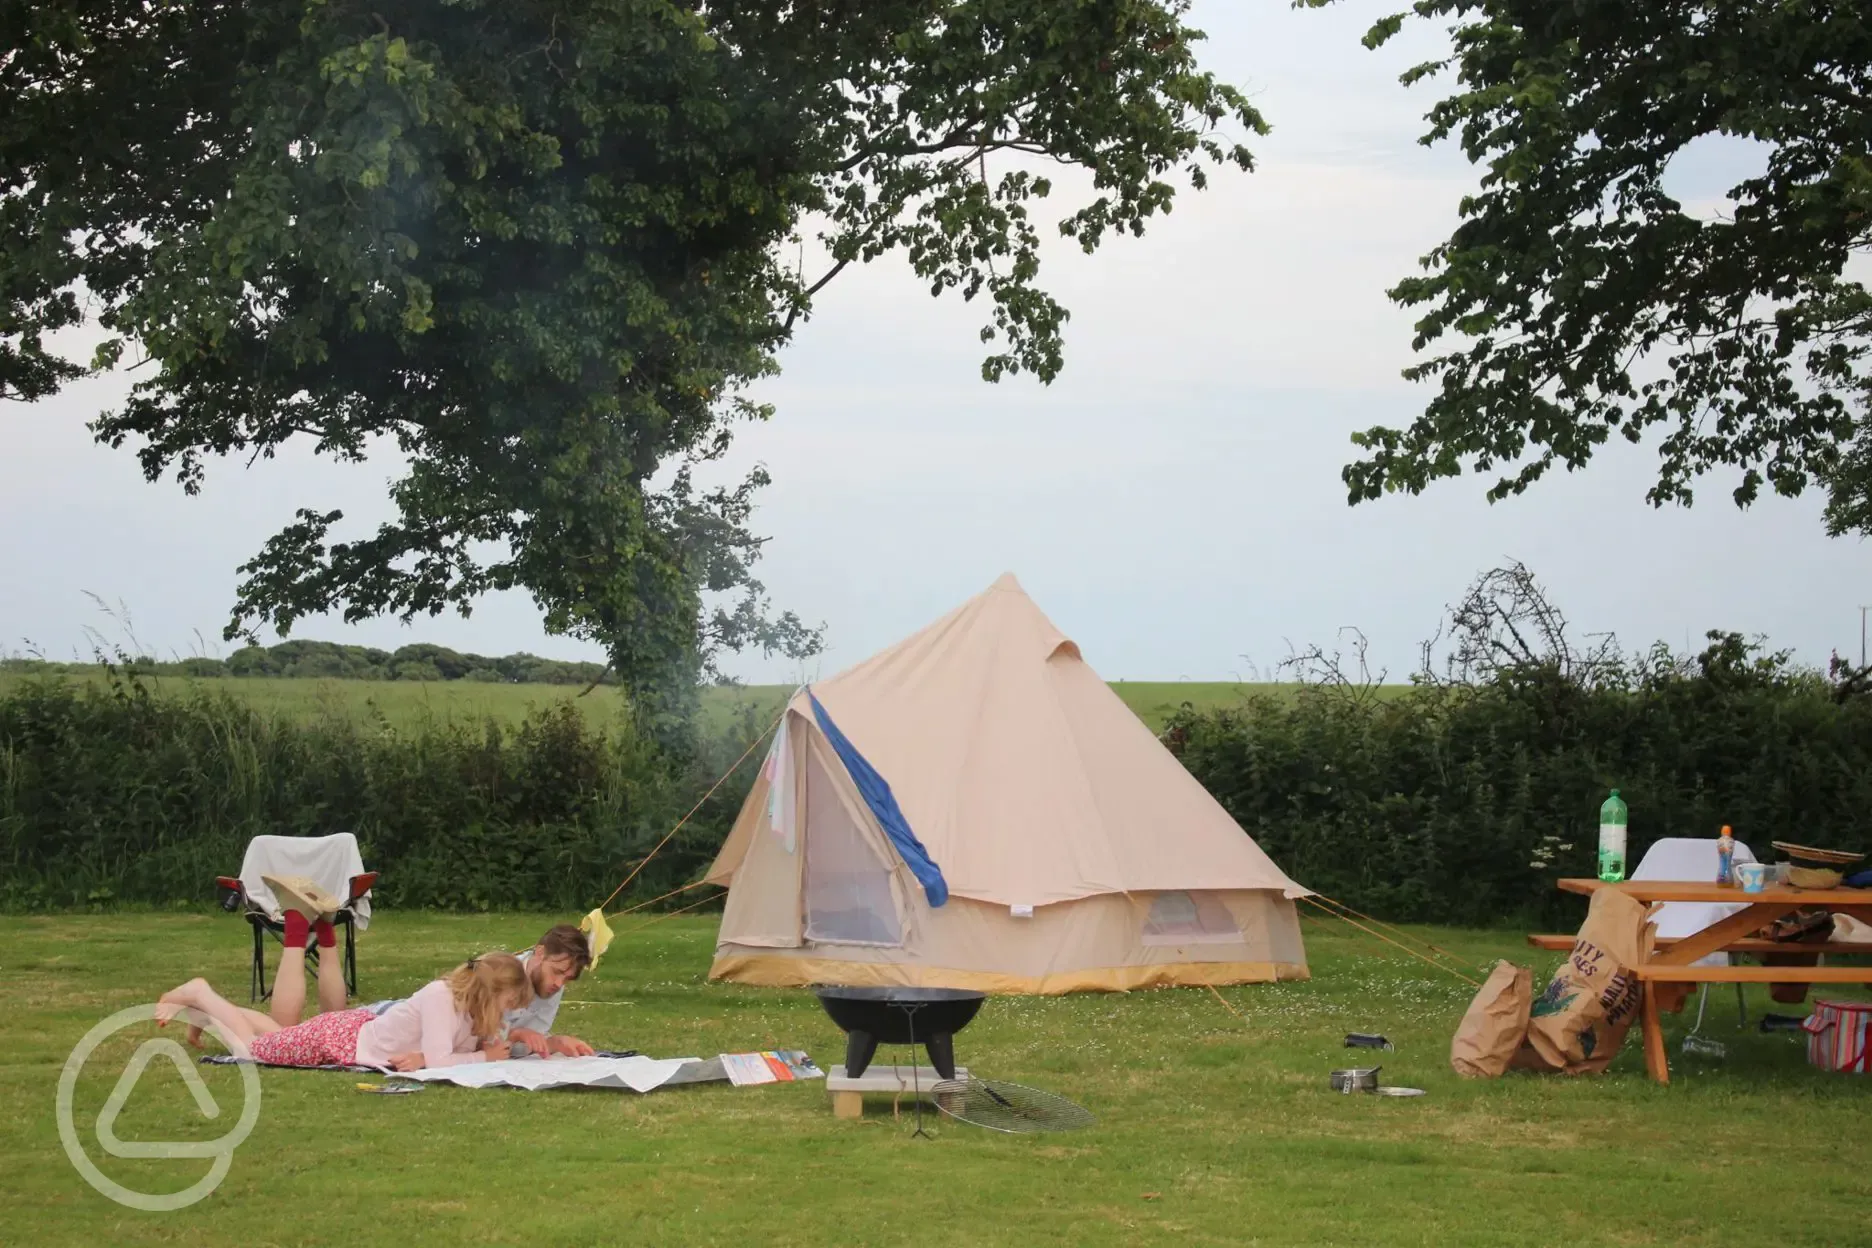 Camping pitch at Stackpole Under the Stars